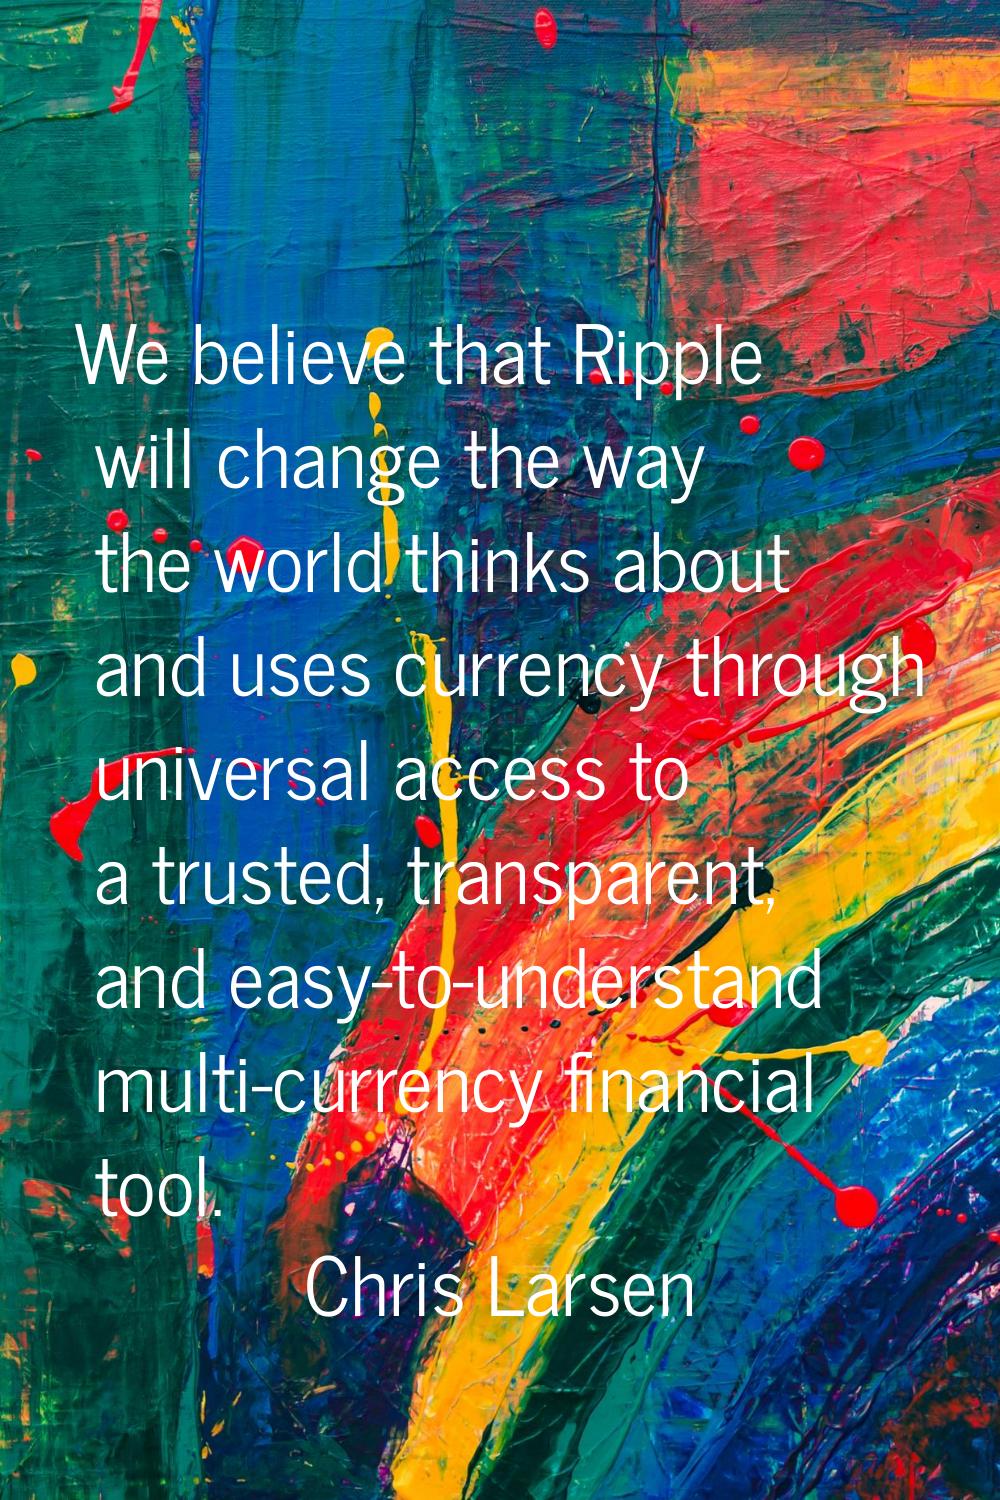 We believe that Ripple will change the way the world thinks about and uses currency through univers